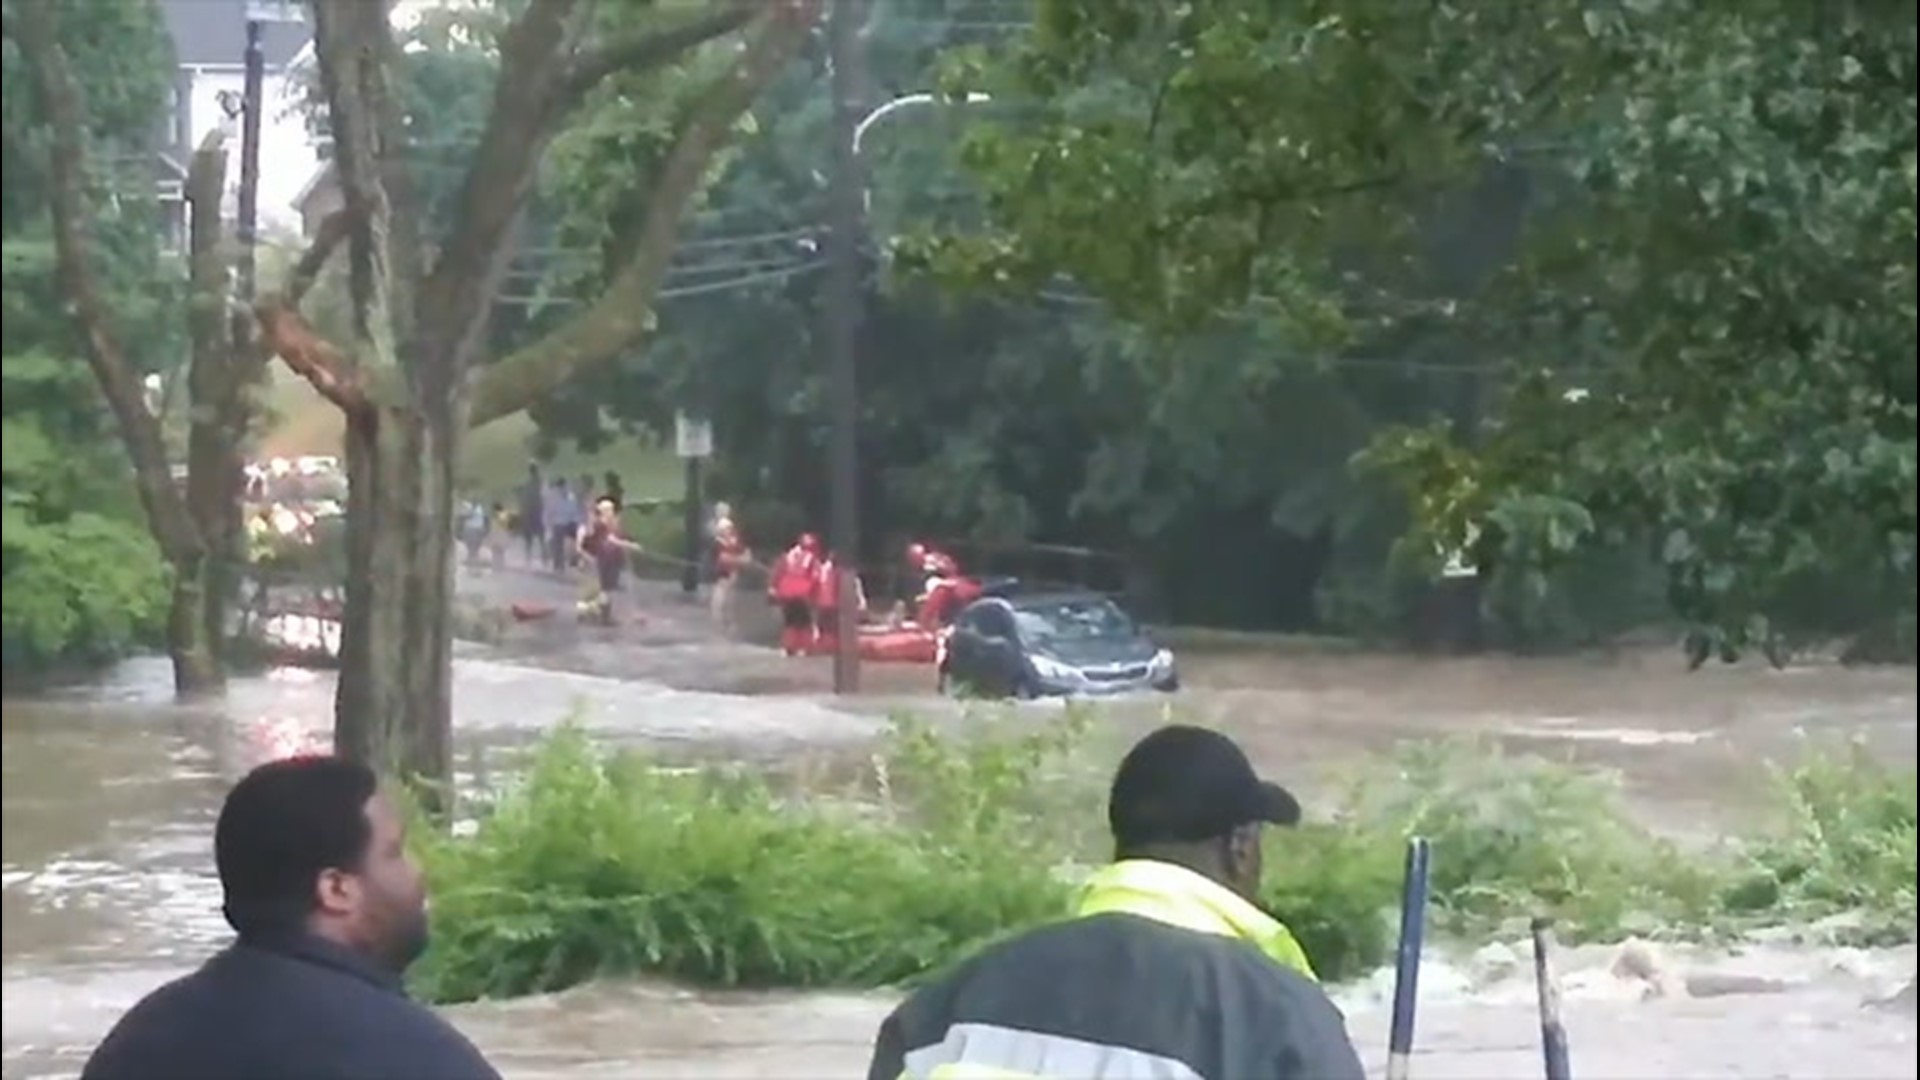 Tacony Creek in Philadelphia, Pennsylvania, rose six feet according to officials in just an hour and a half, as rain poured down on July 6.